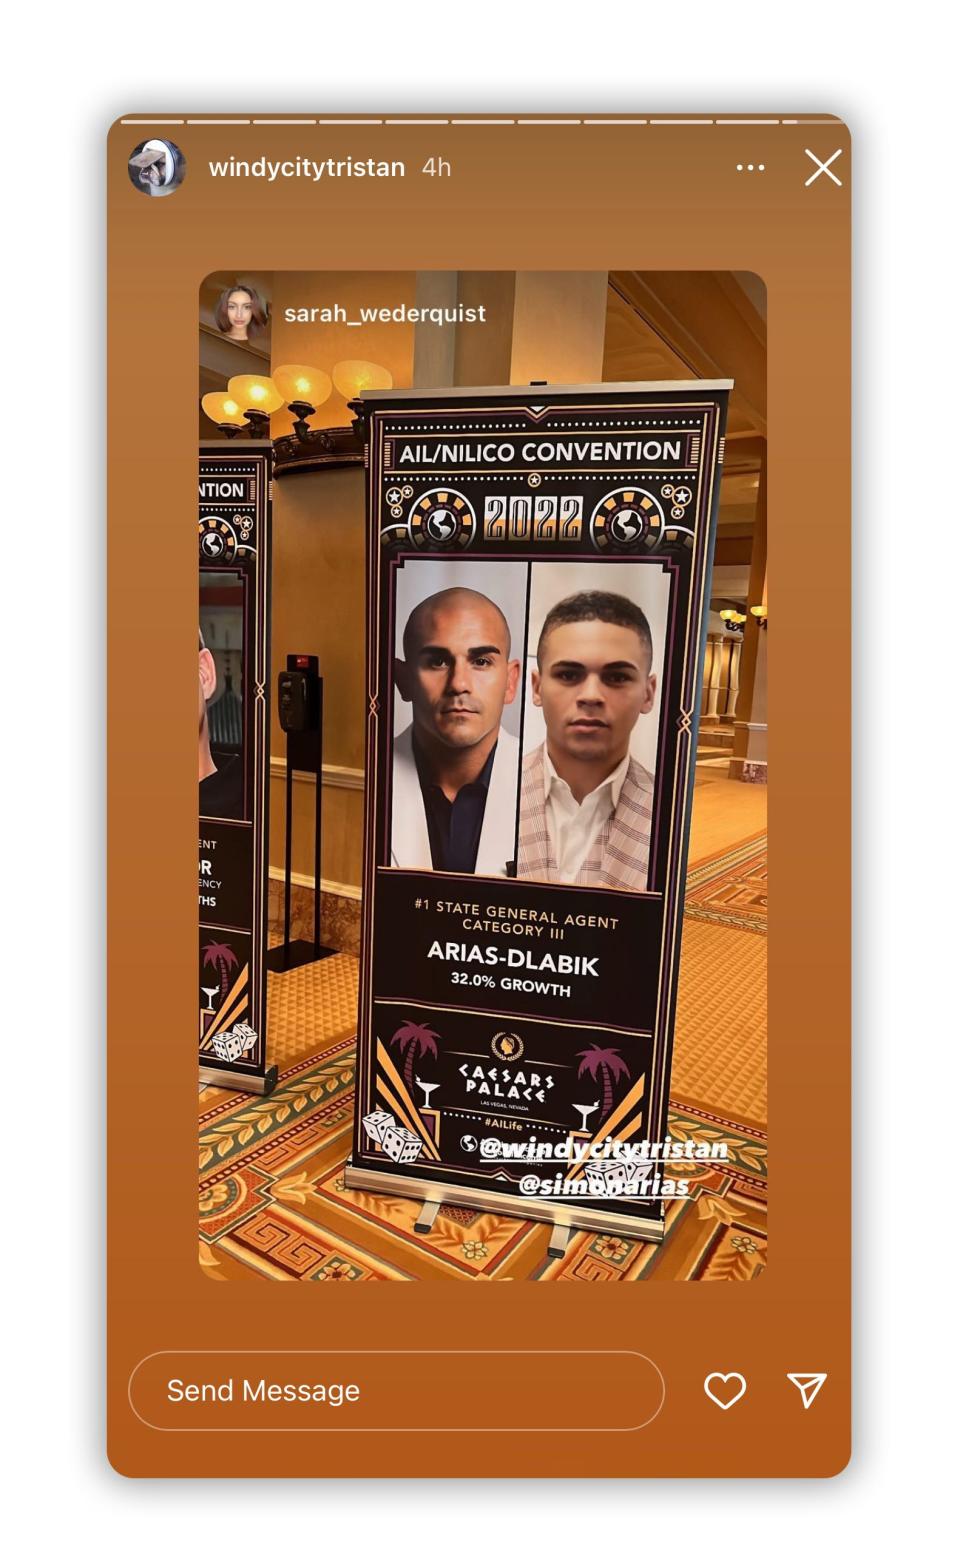 An Instagram story showing Simon Arias and Tristan Dlabik on a poster for an AIL convention